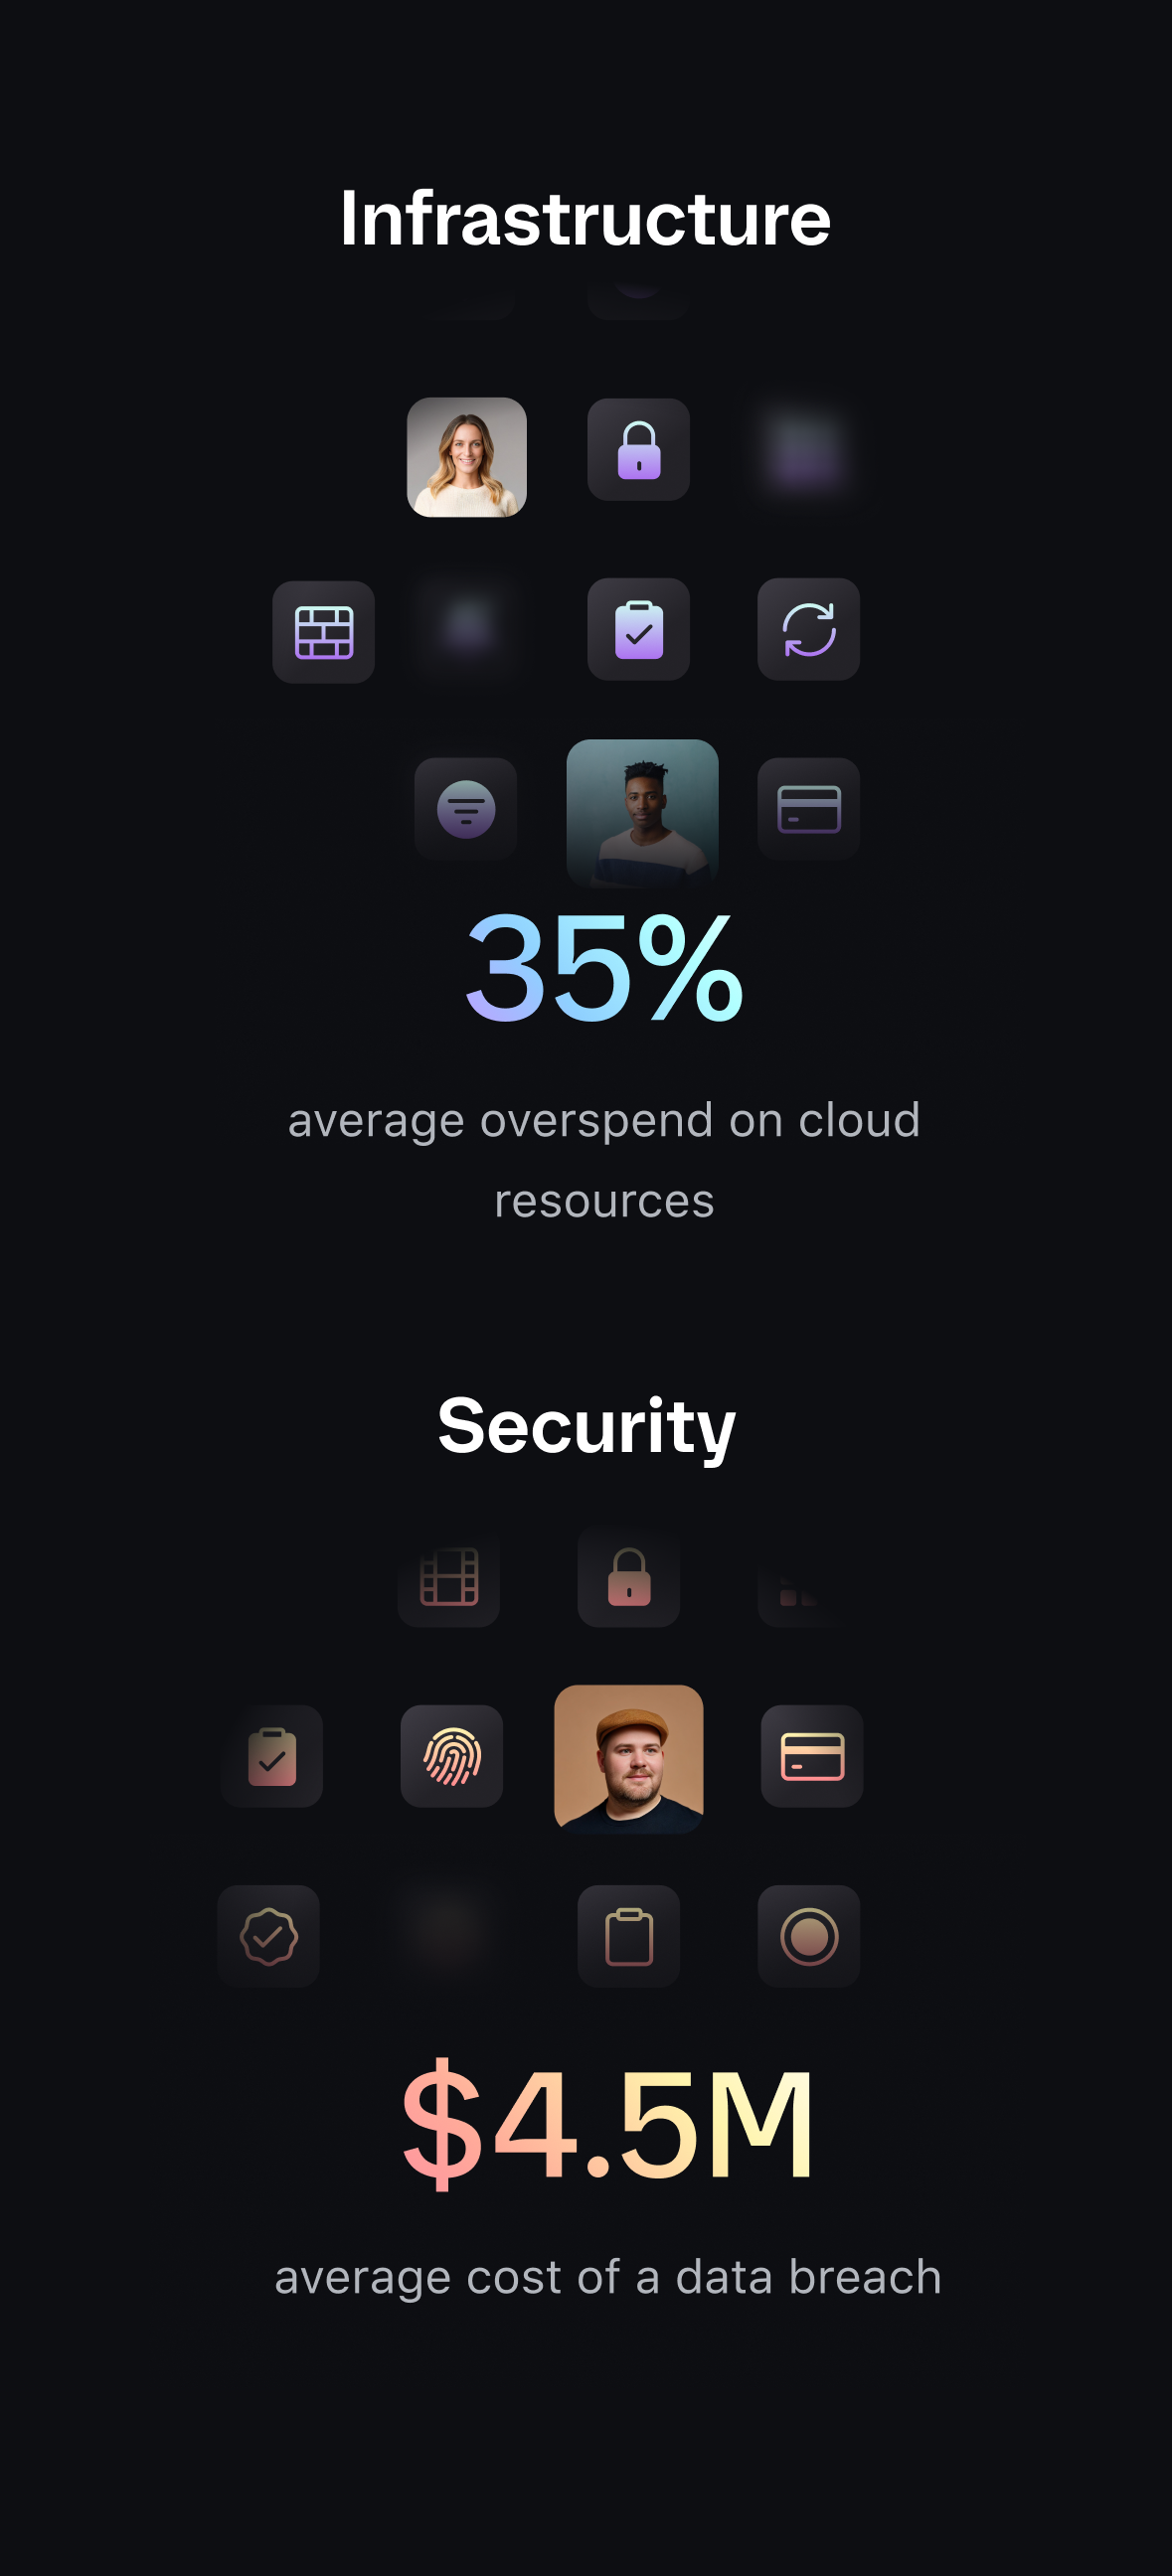 Infrastructure. 35% average overspend on cloud resources. Security. $4.5M average cost of a data breach.